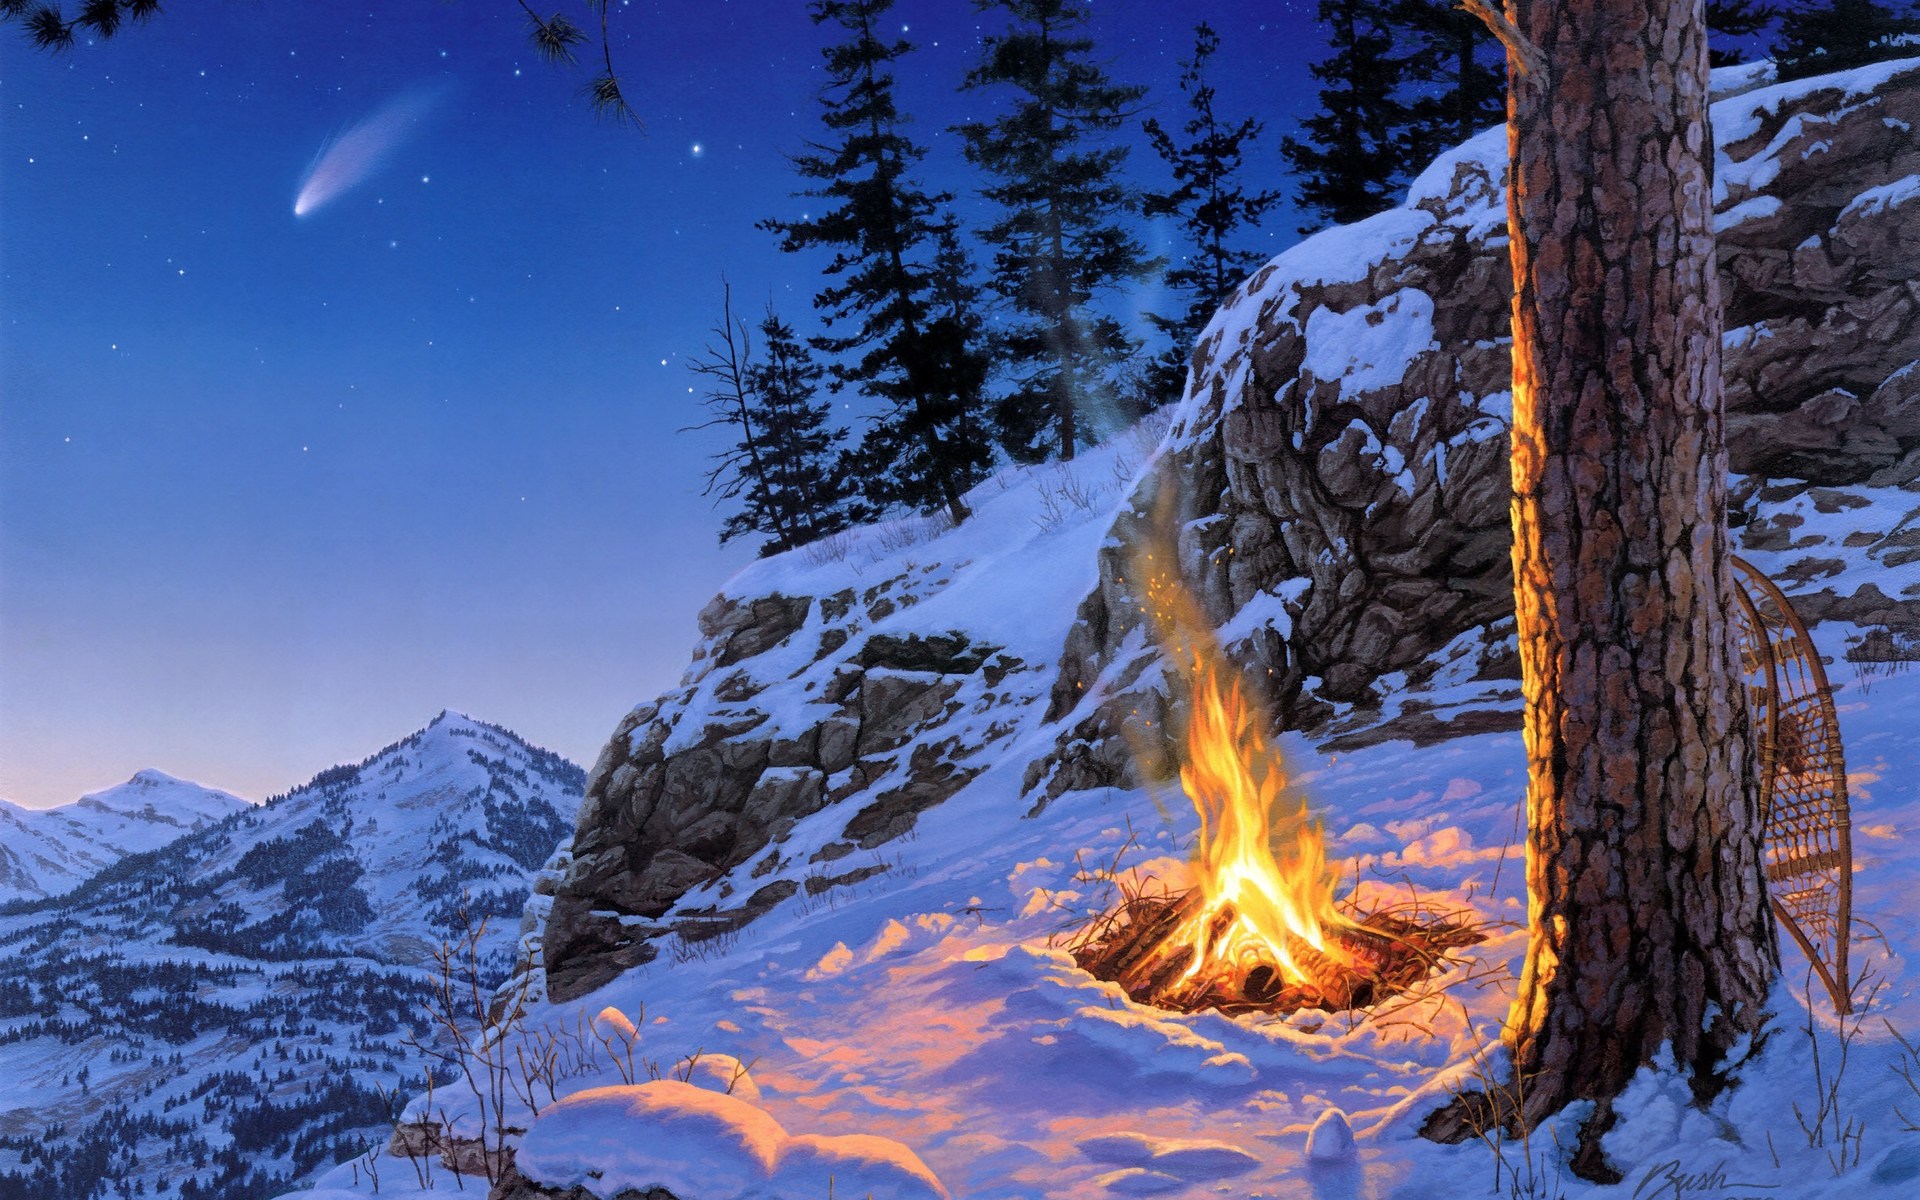 darrel bush, Paintings, Artistic, Landscapes, Mountains, Winter, Snow, Fire, Flames, Scenic, Nature, Trees, Forests Wallpaper